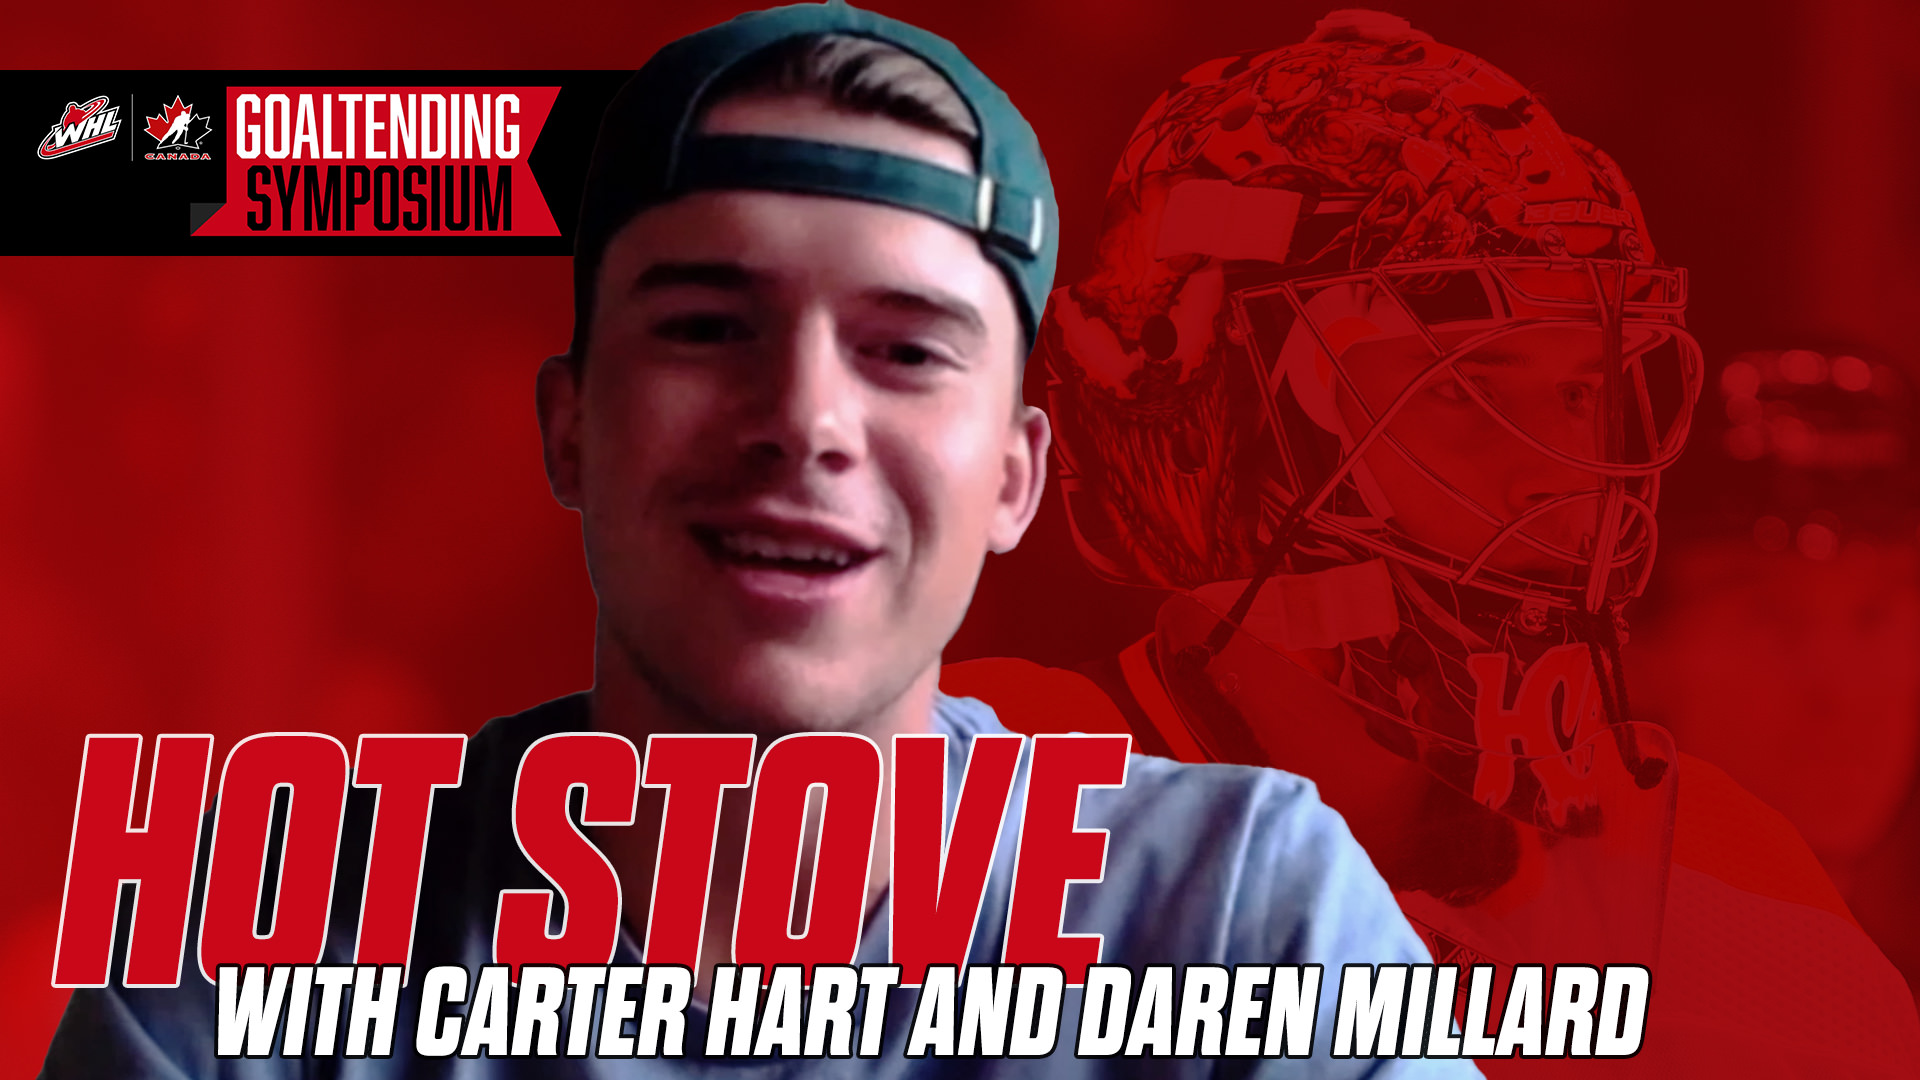 Exclusive Carter Hart hot stove interview from the 2020 WHL / Hockey Canada Goaltending Symposium